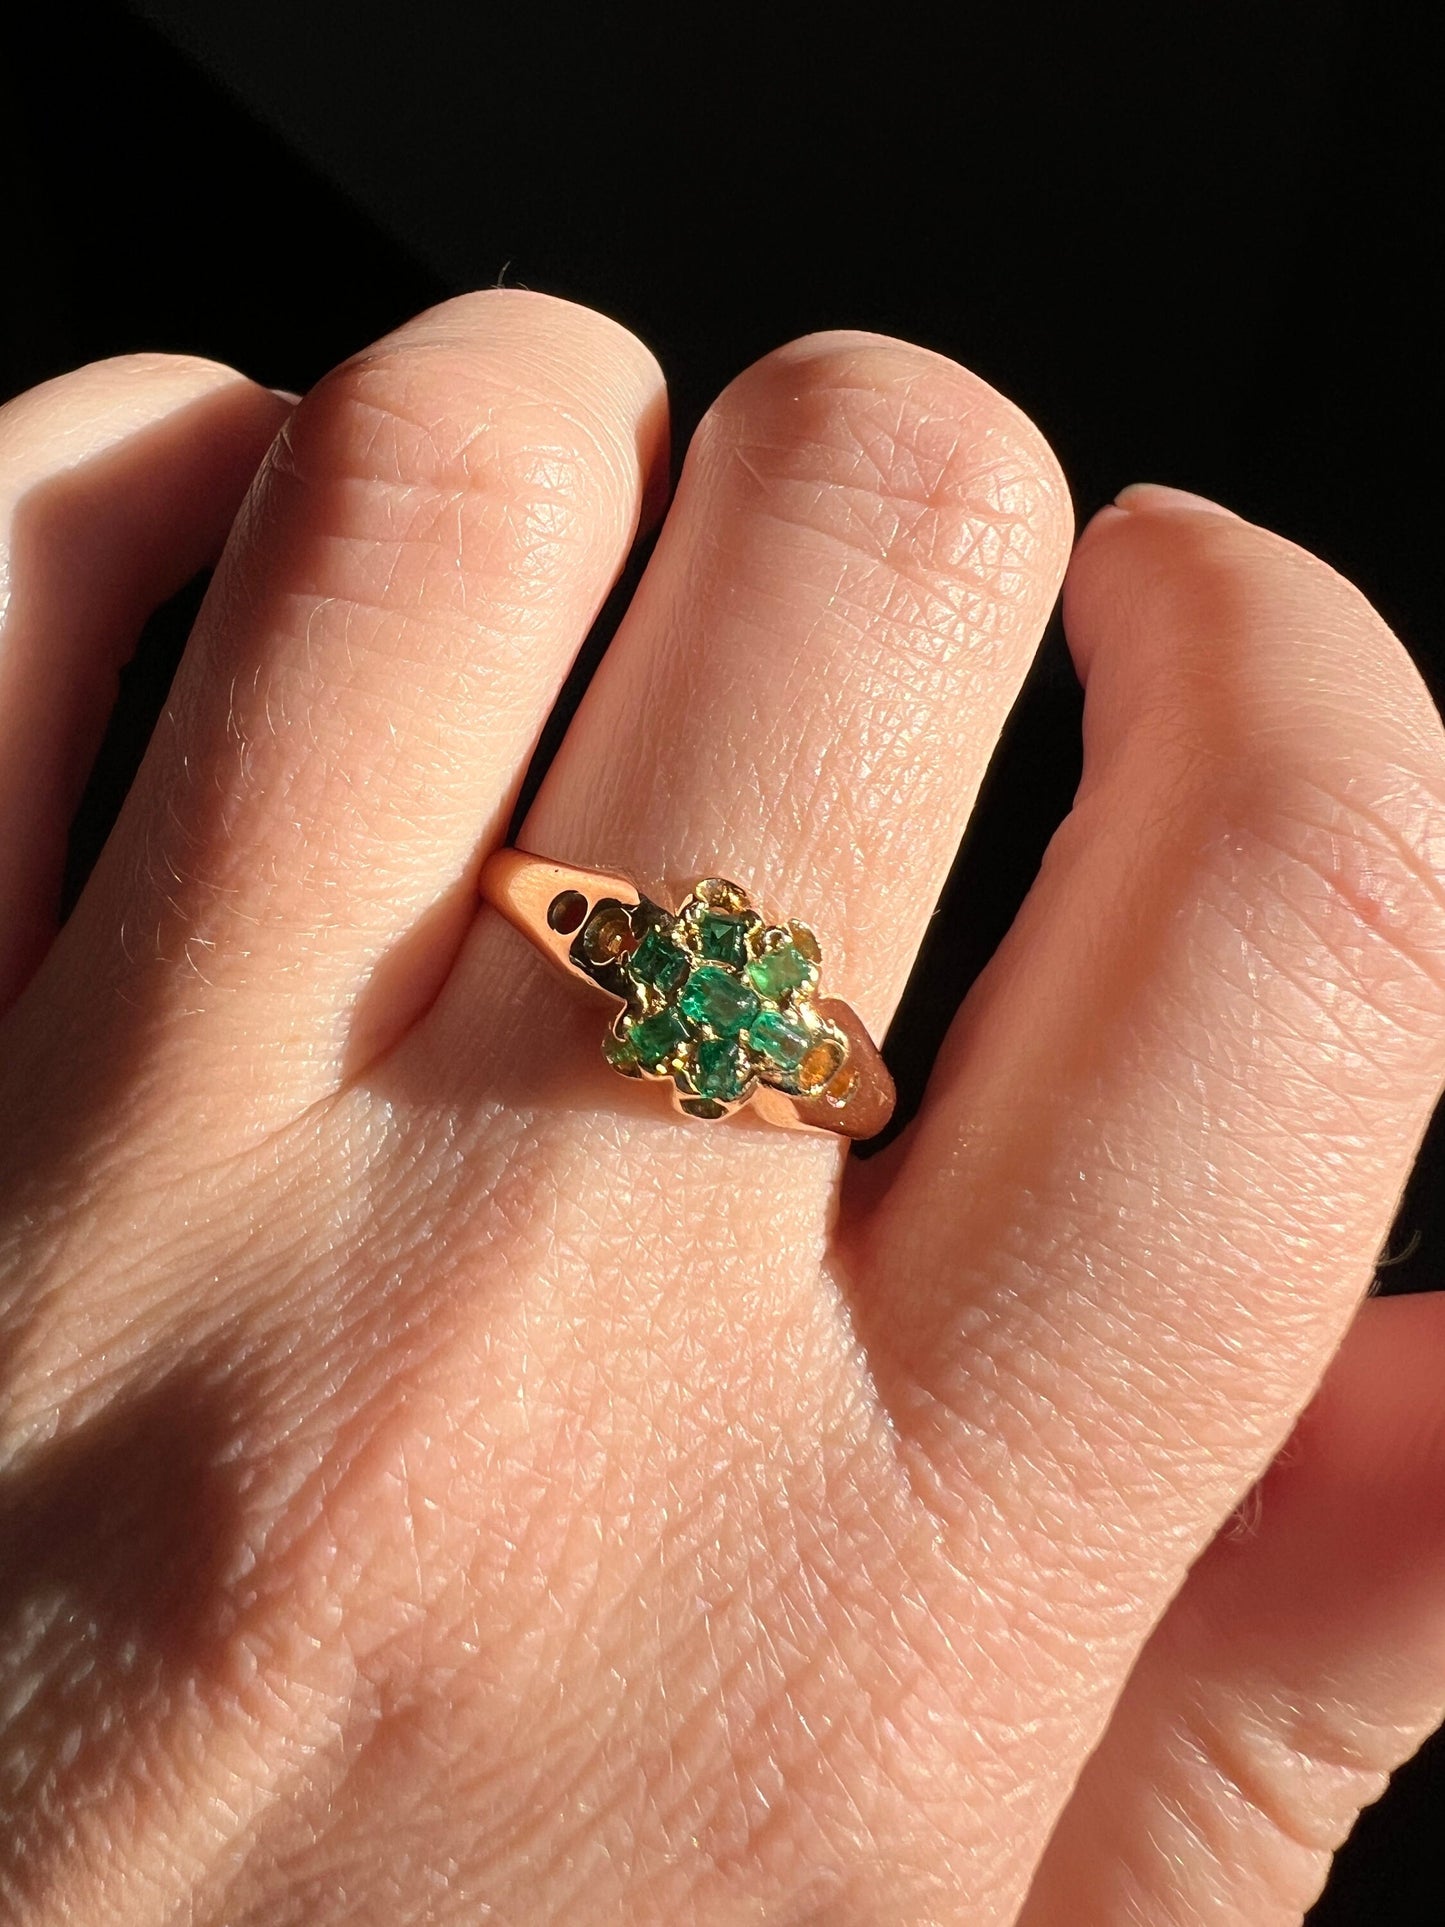 STARBURST Antique c1924 15k GOLD Band Stacker Green Romantic Gift Skinny Layering Art Deco Later Dated Engraved "David 1967" Unique